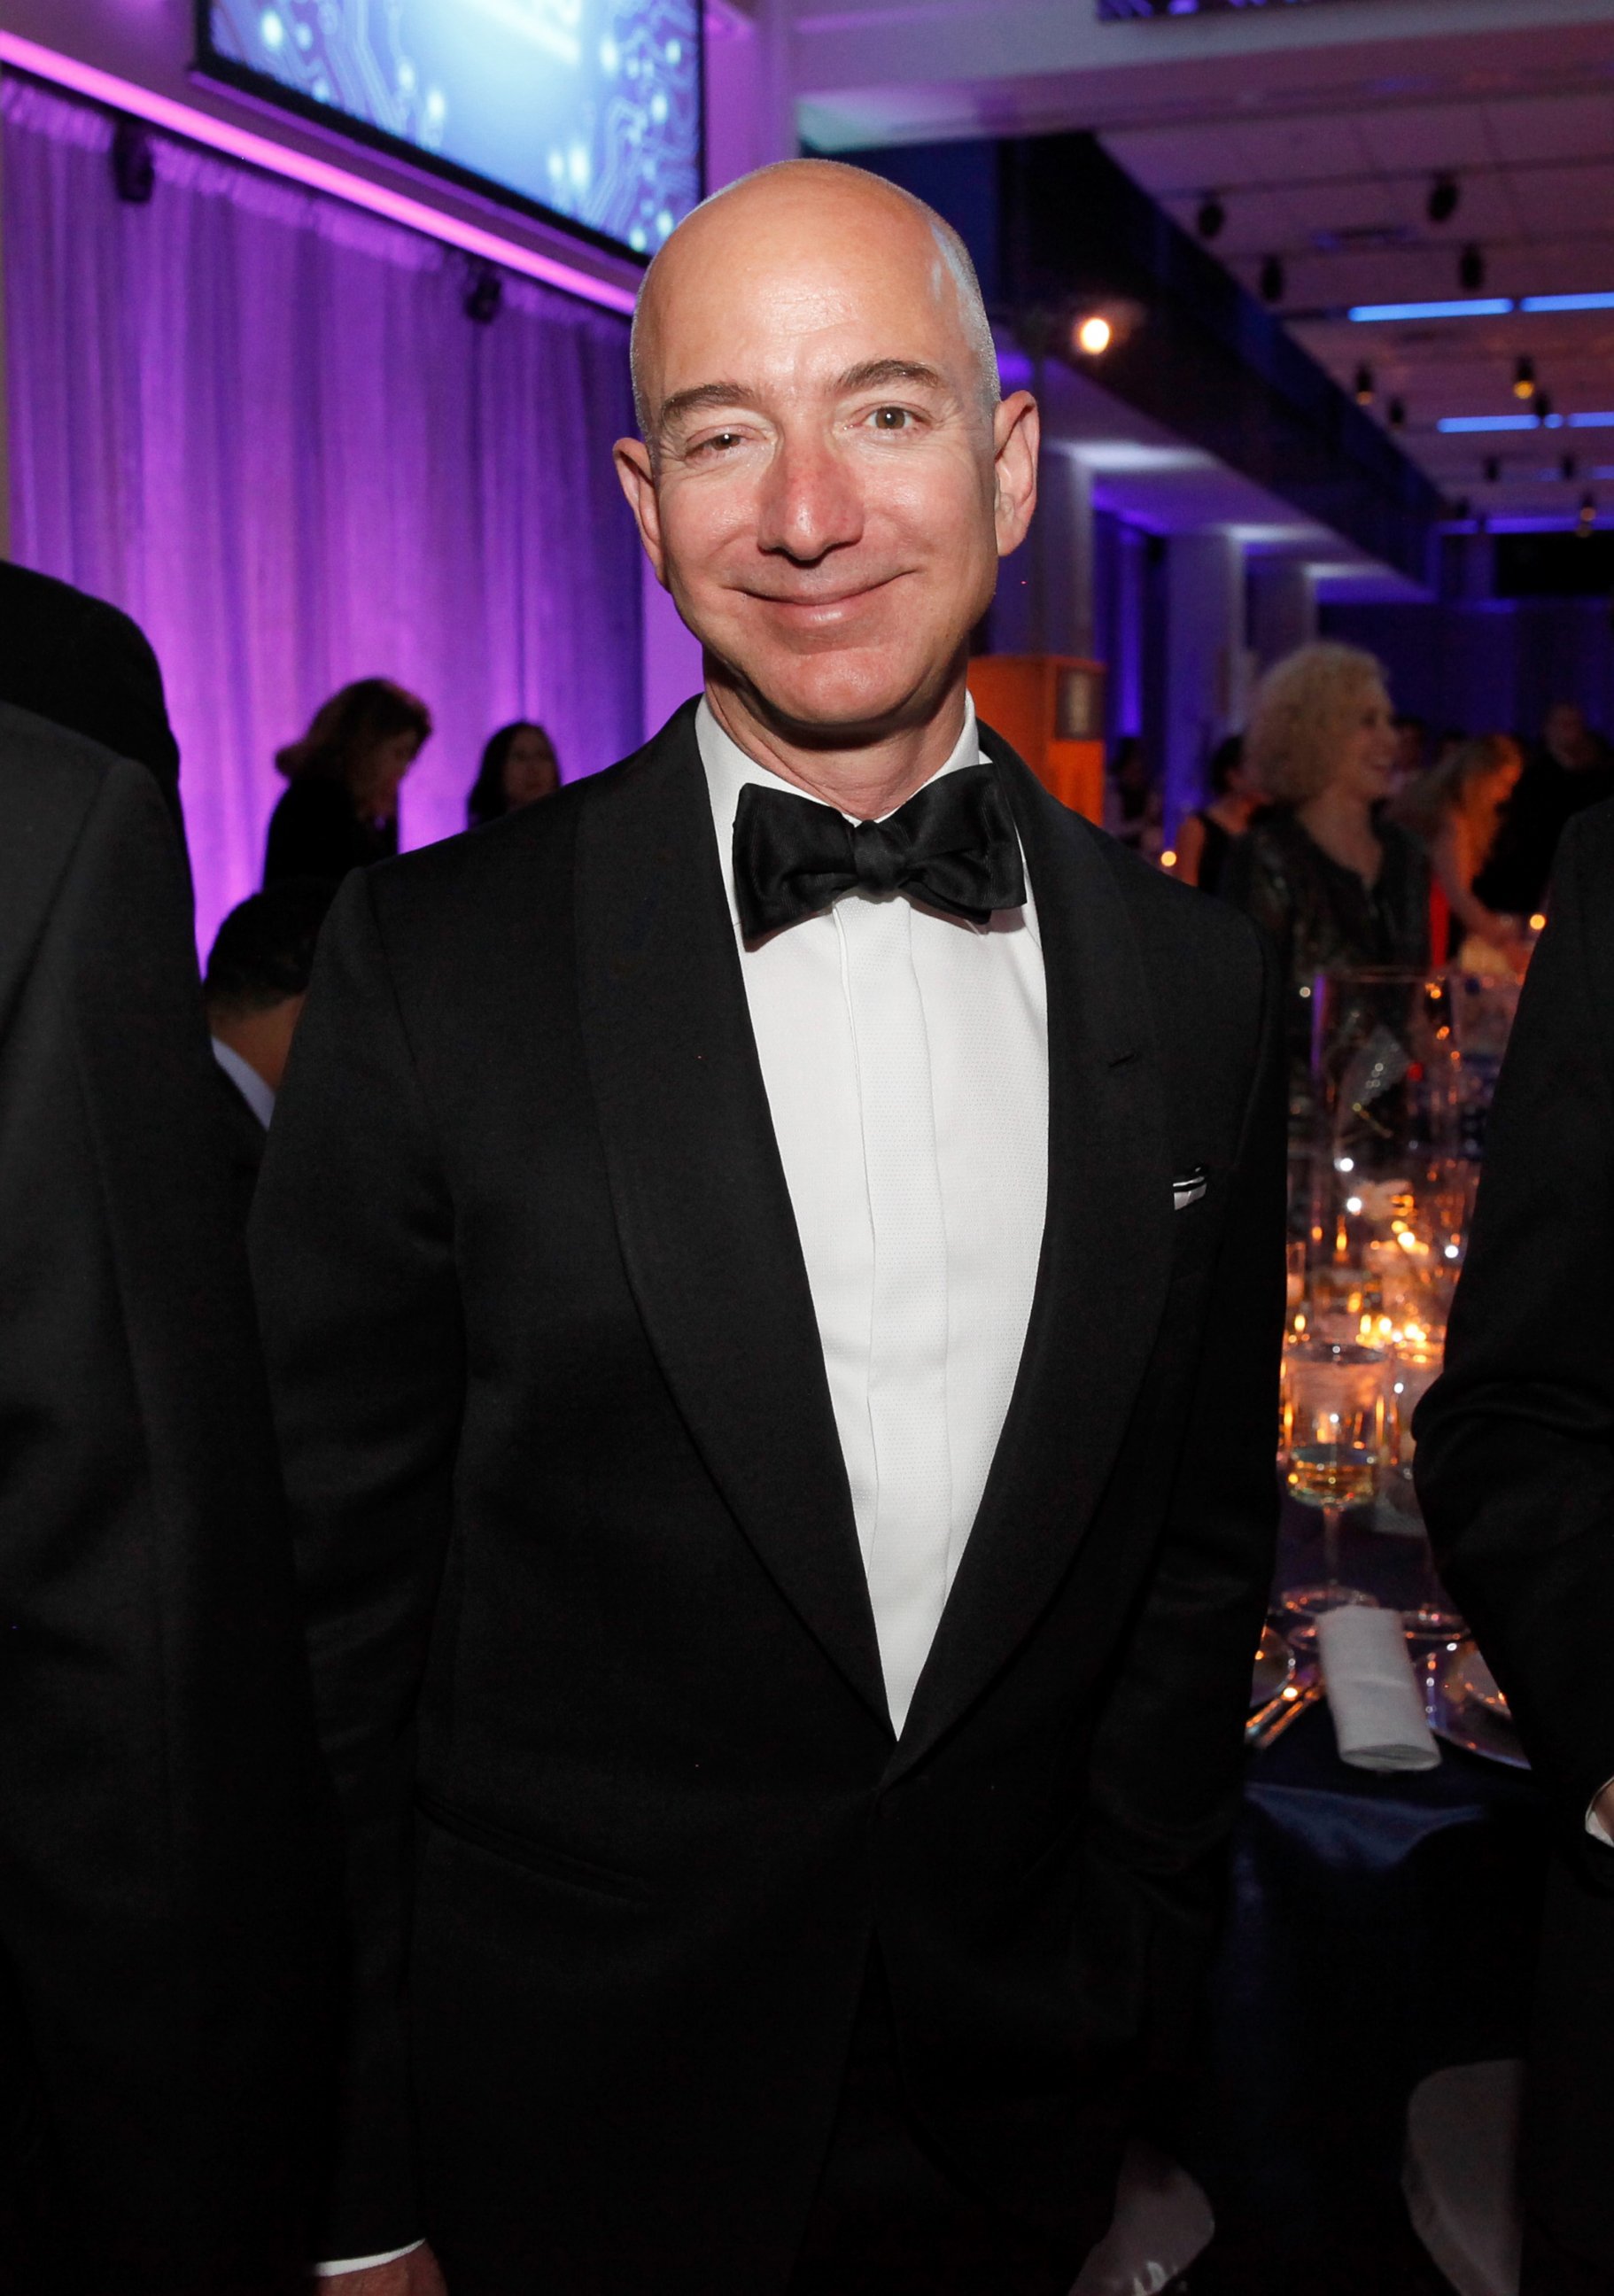 PHOTO: President and CEO of Amazon Jeff Bezos attends Liberty Science Center's Genius Gala 4.0 at Liberty Science Center in Jersey City, N.J., May 1, 2015.